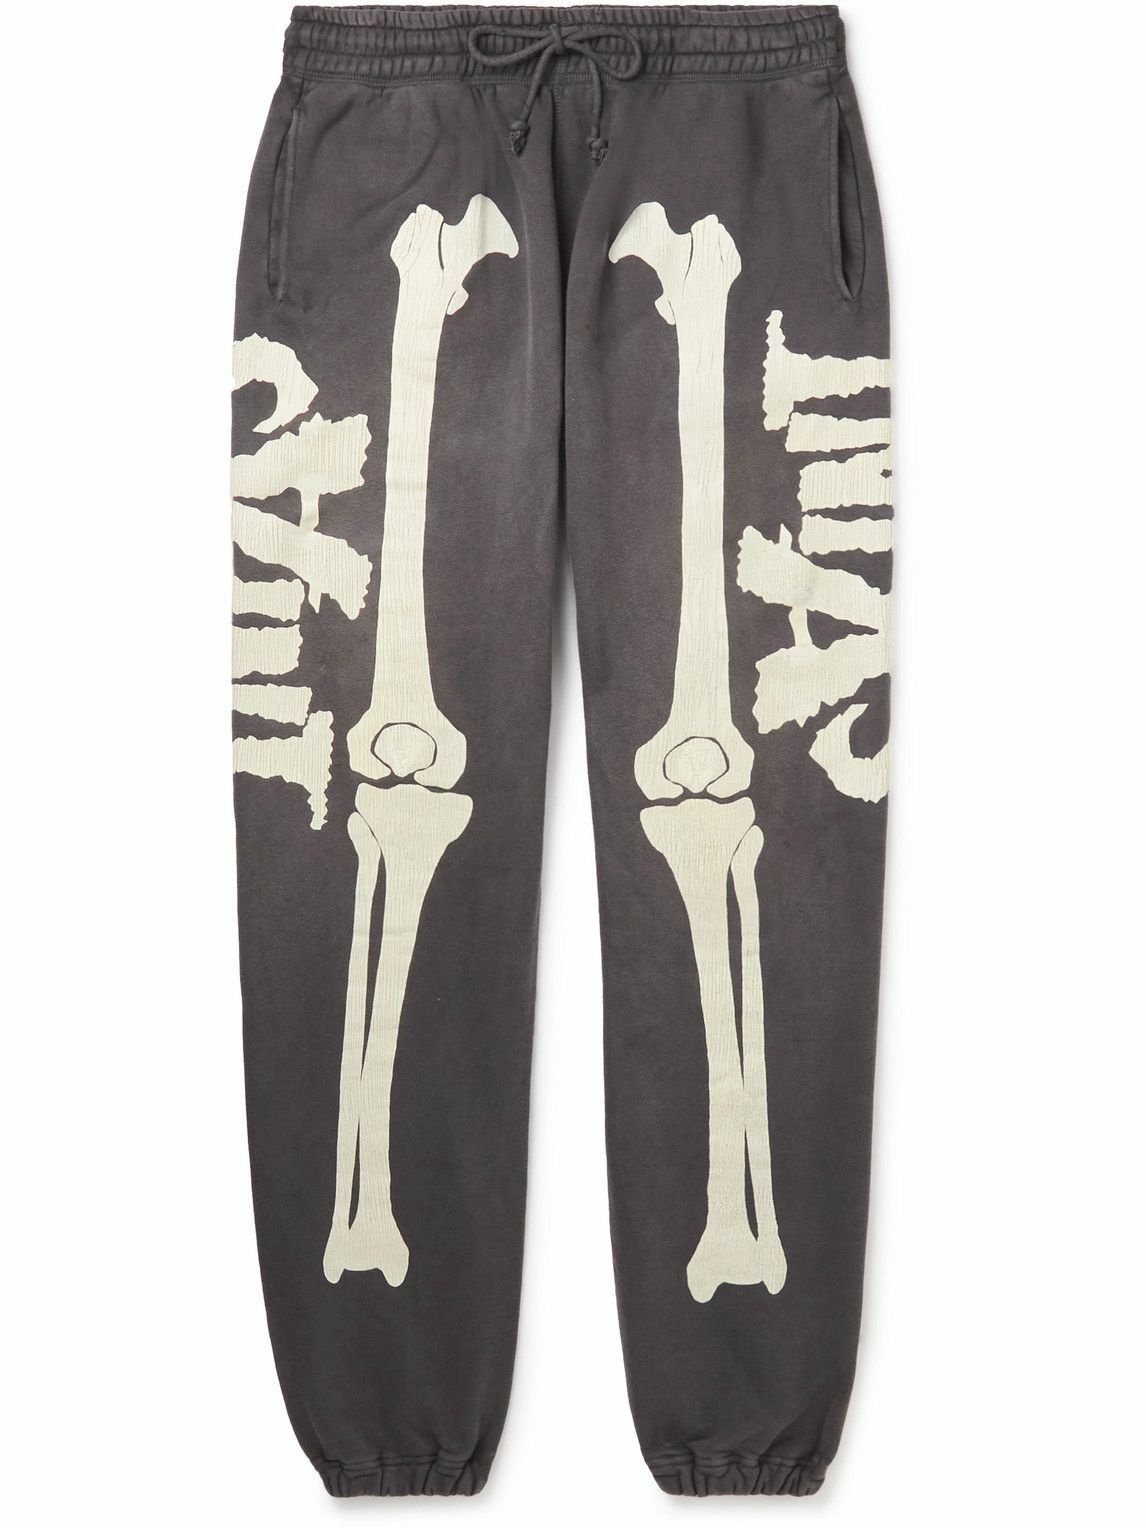 SAINT Mxxxxxx - Tapered Distressed Printed Cotton-Jersey Sweatpants - Gray